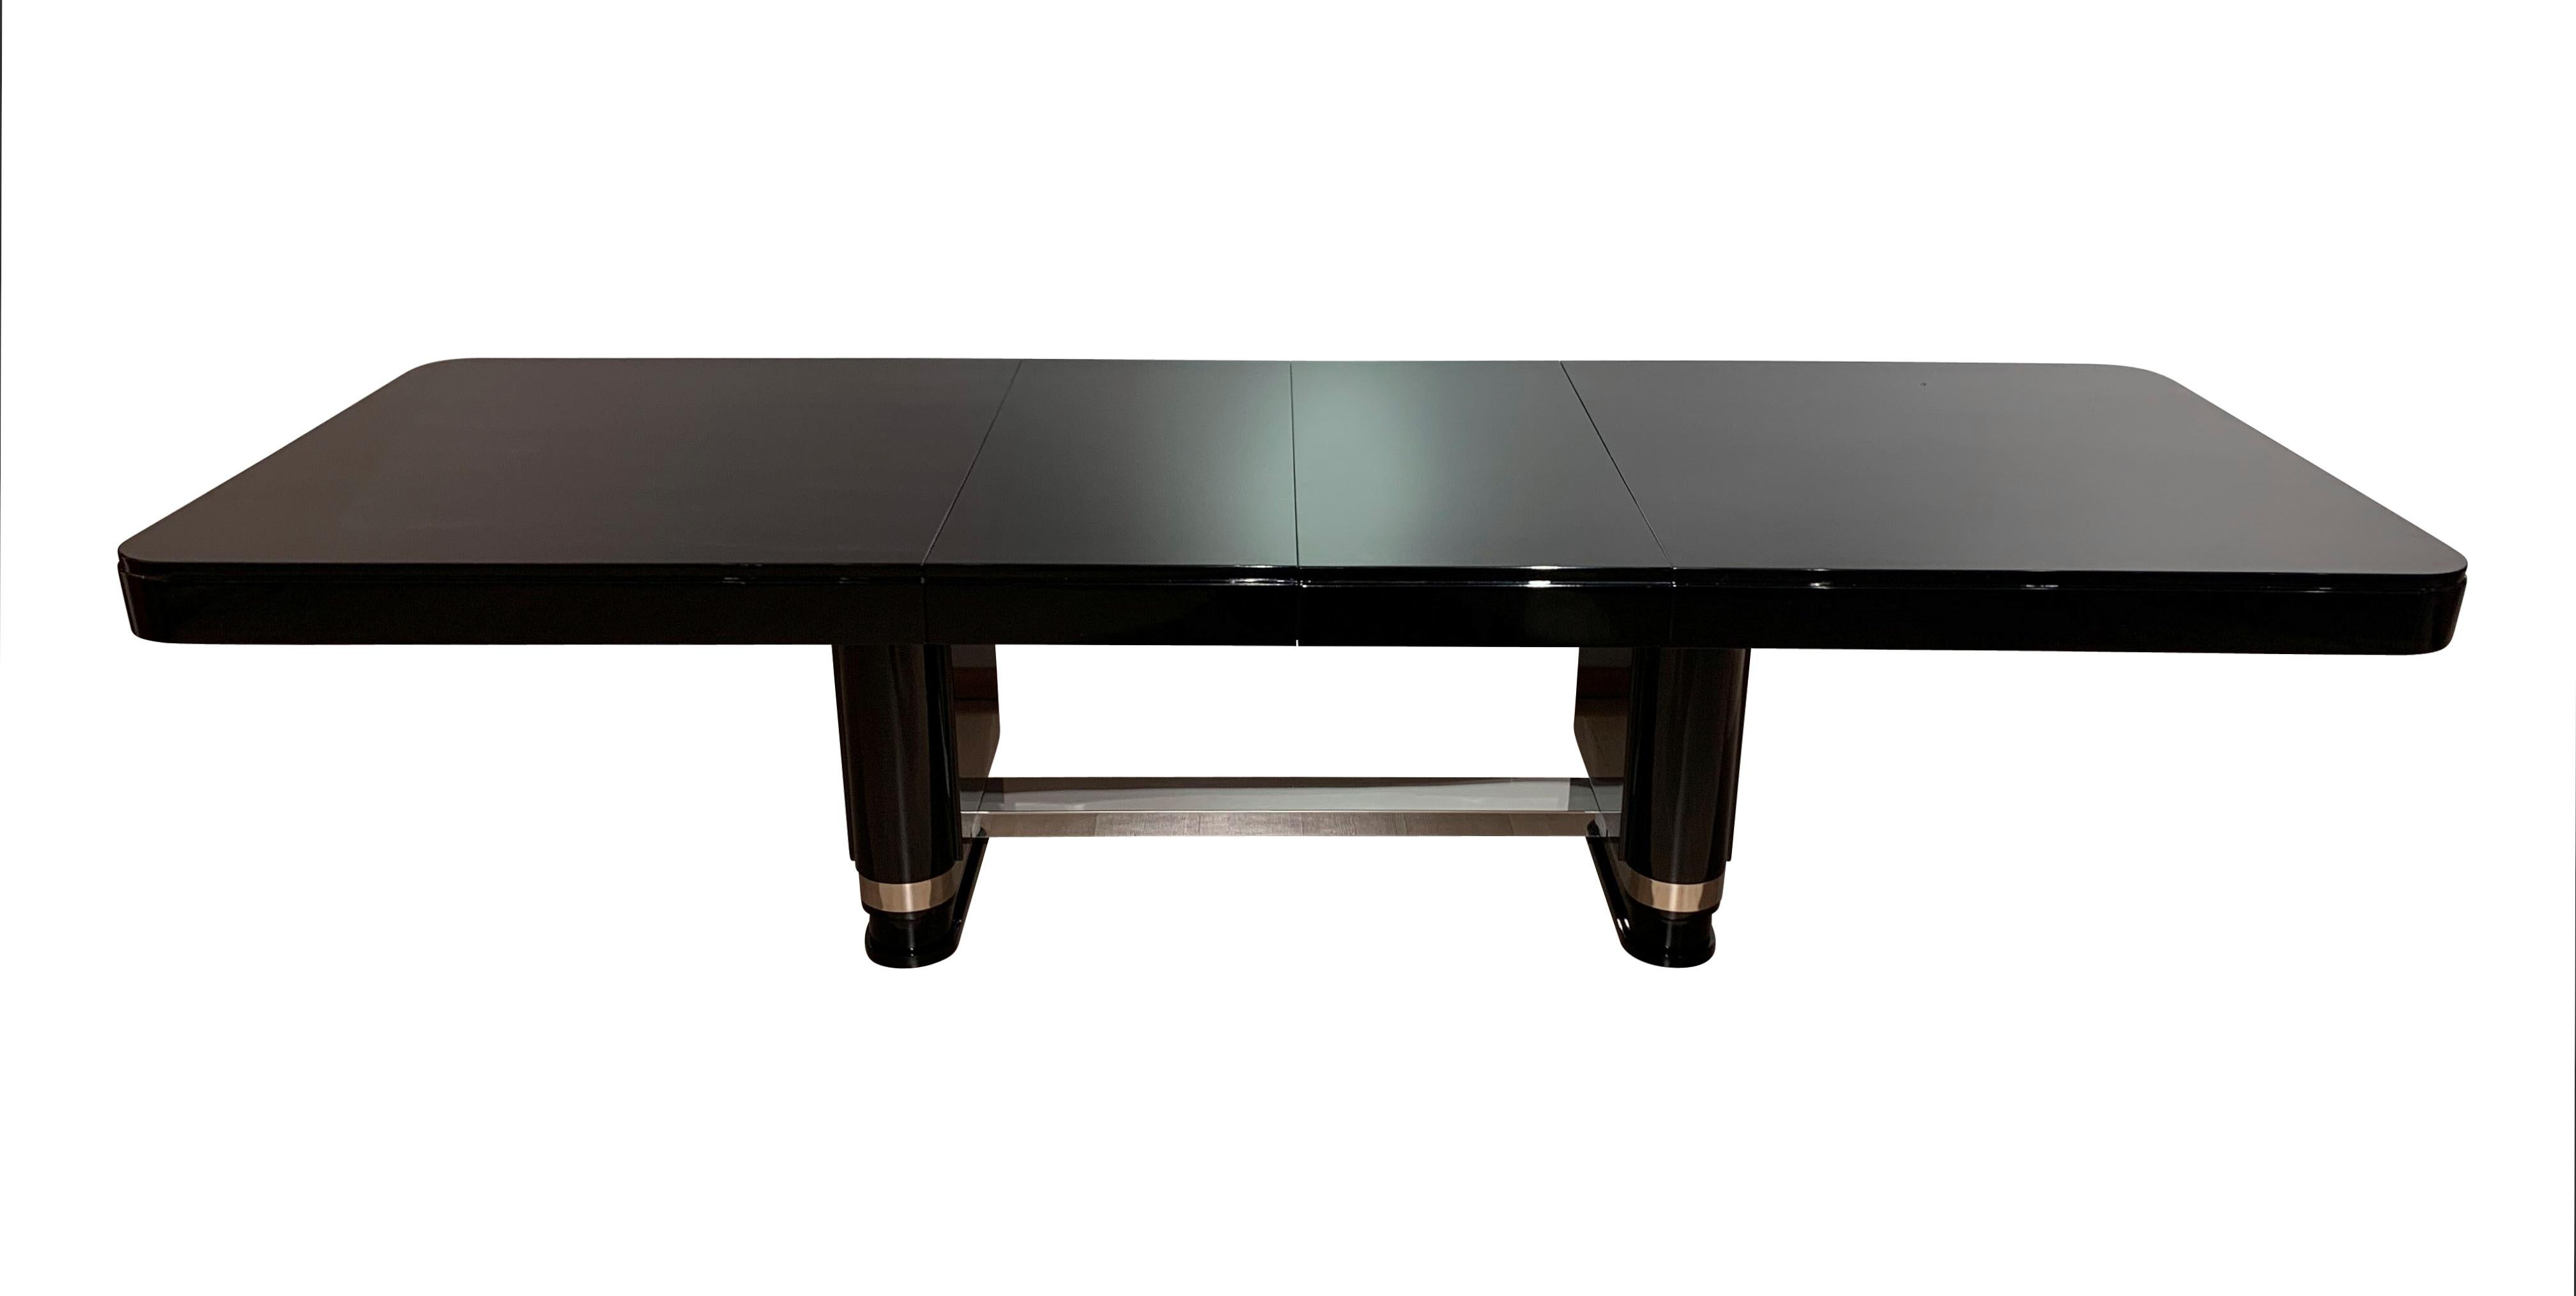 Large original Art Deco expandable / extending table in black lacquer with metal parts from France, circa 1930s.
Originally used as a big dining room table, it could also be used greatly as an impressive conference table.

Very high quality black